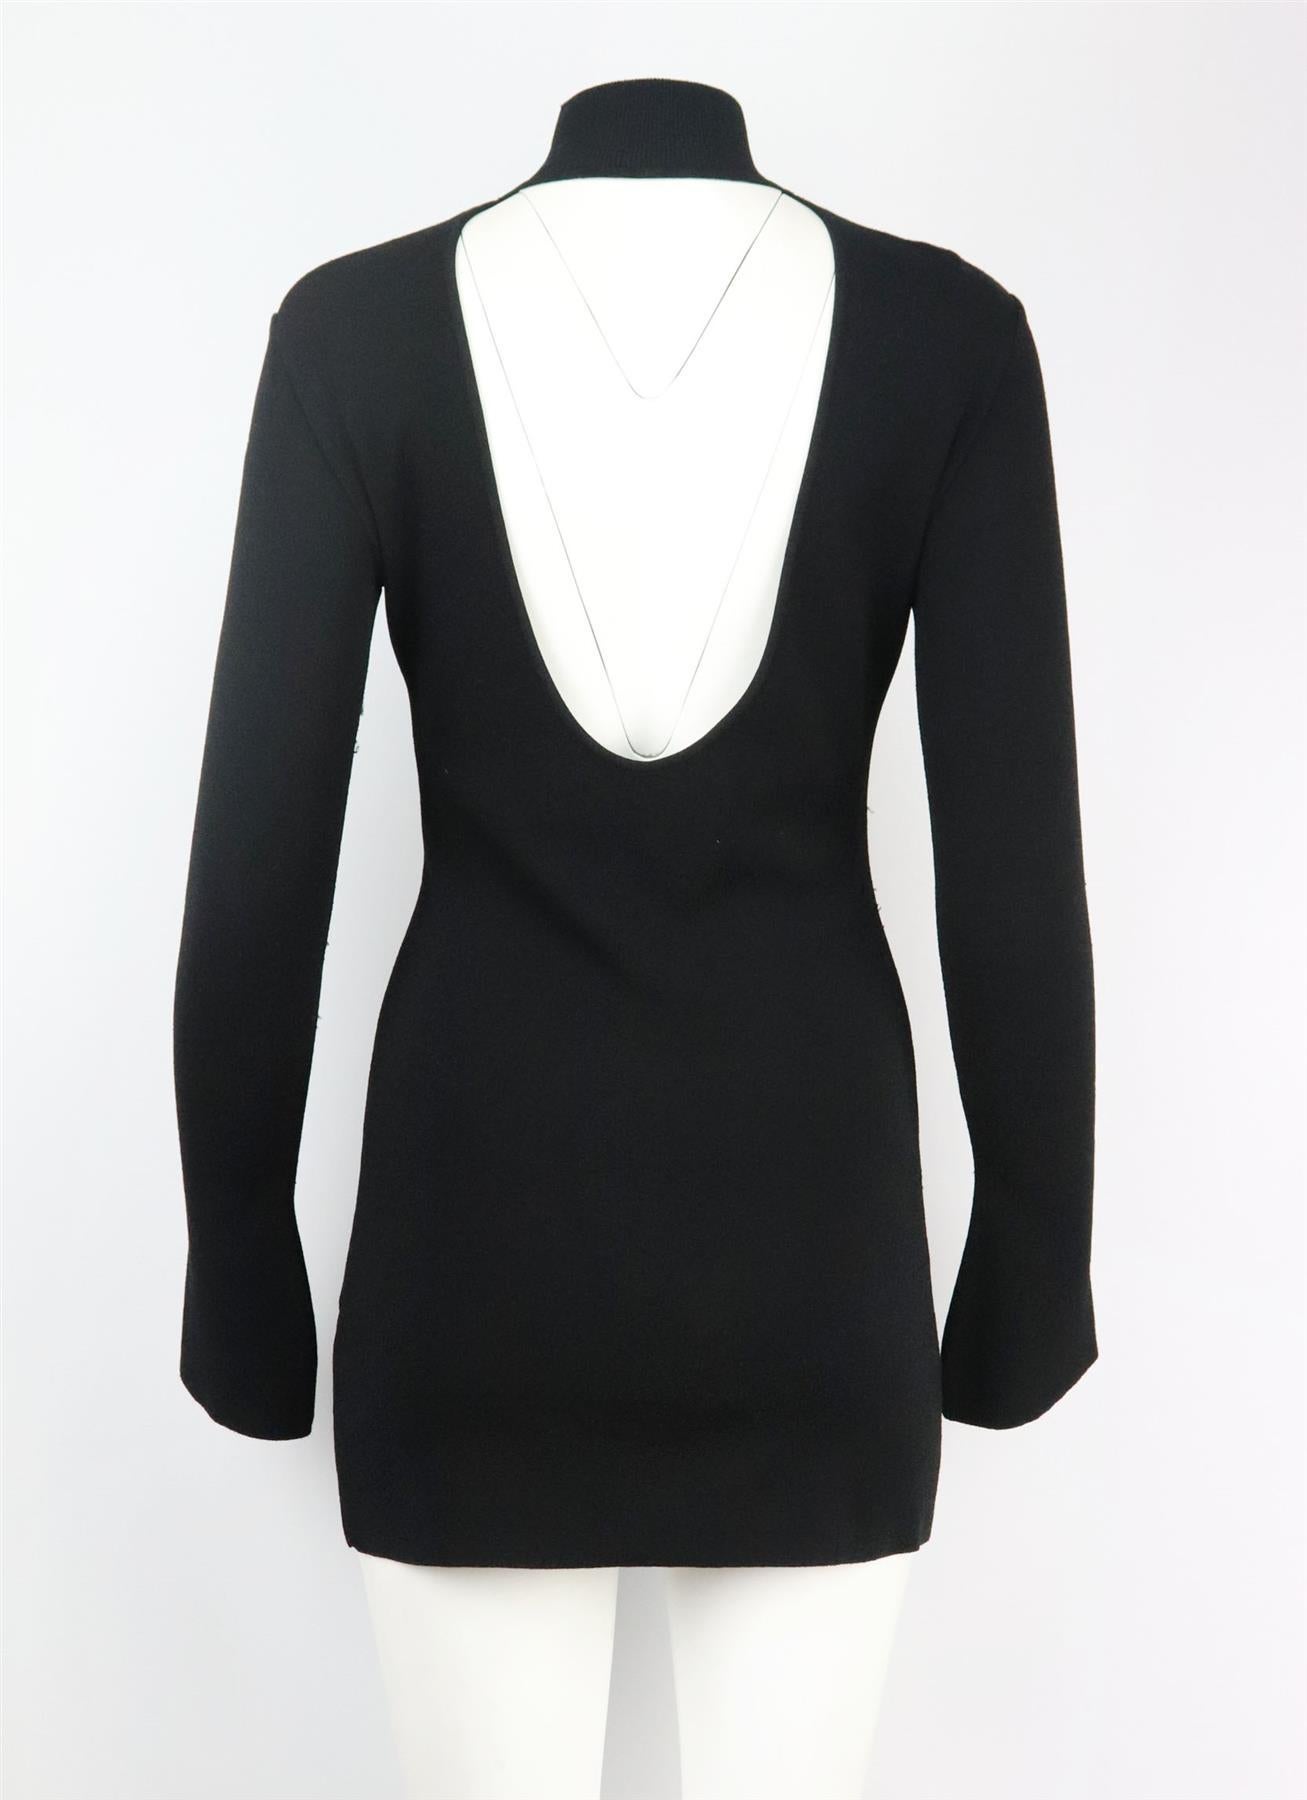 This turtleneck mini dress by Off-White is made from black stretch-knit and has a close, figure-hugging fit, it has a logo-intarsia detail on the front and turns to reveal an open back. Black viscose-blend. Slips on. 79% Viscose, 21% polyester.